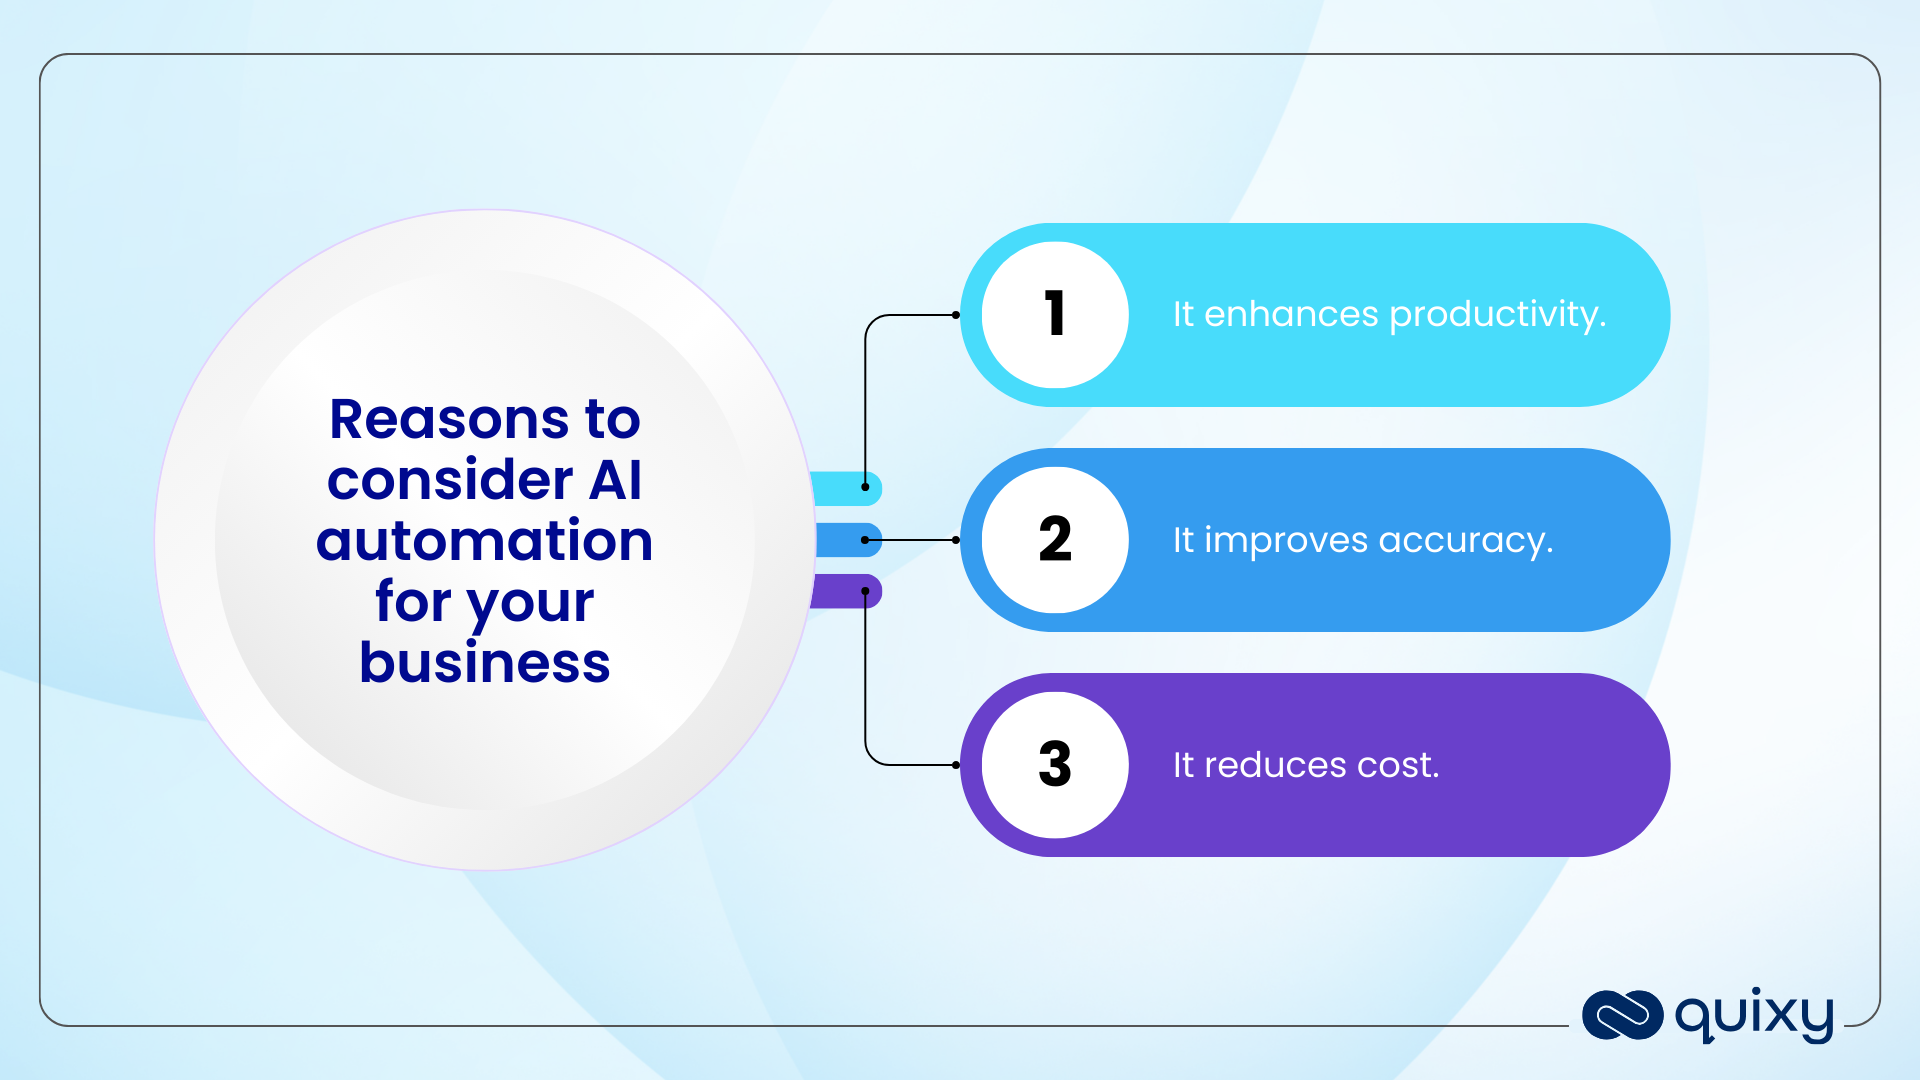 Reasons to consider AI automation for your business